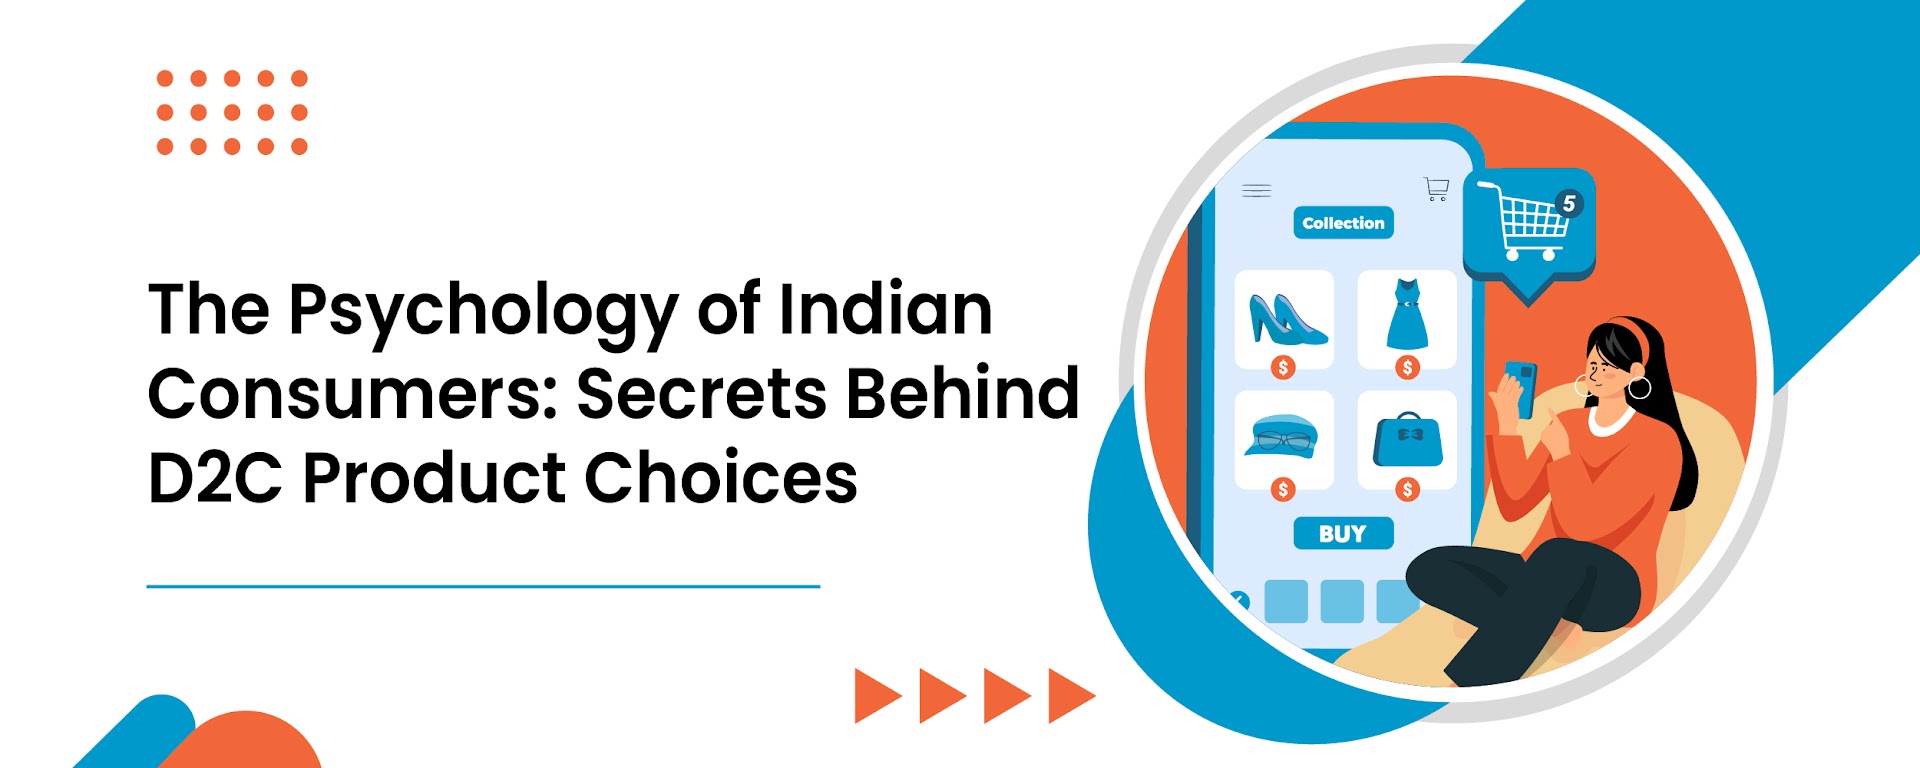 The Psychology of Indian Consumers: Secrets Behind D2C Product Choices